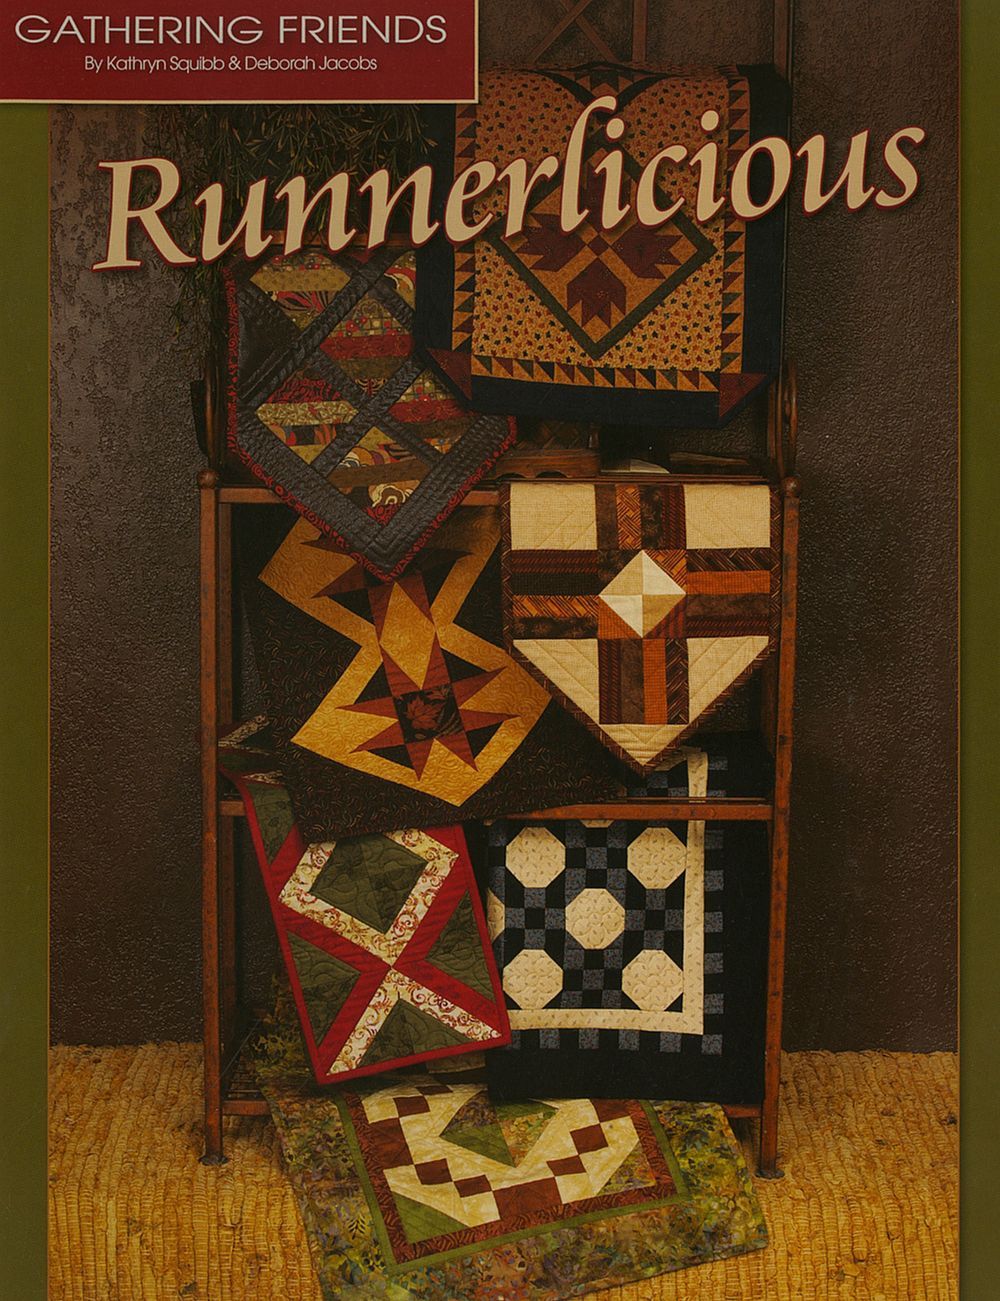 Runnerlicious Quilt Pattern Book by Kathryn Squibb of Gathering Friends